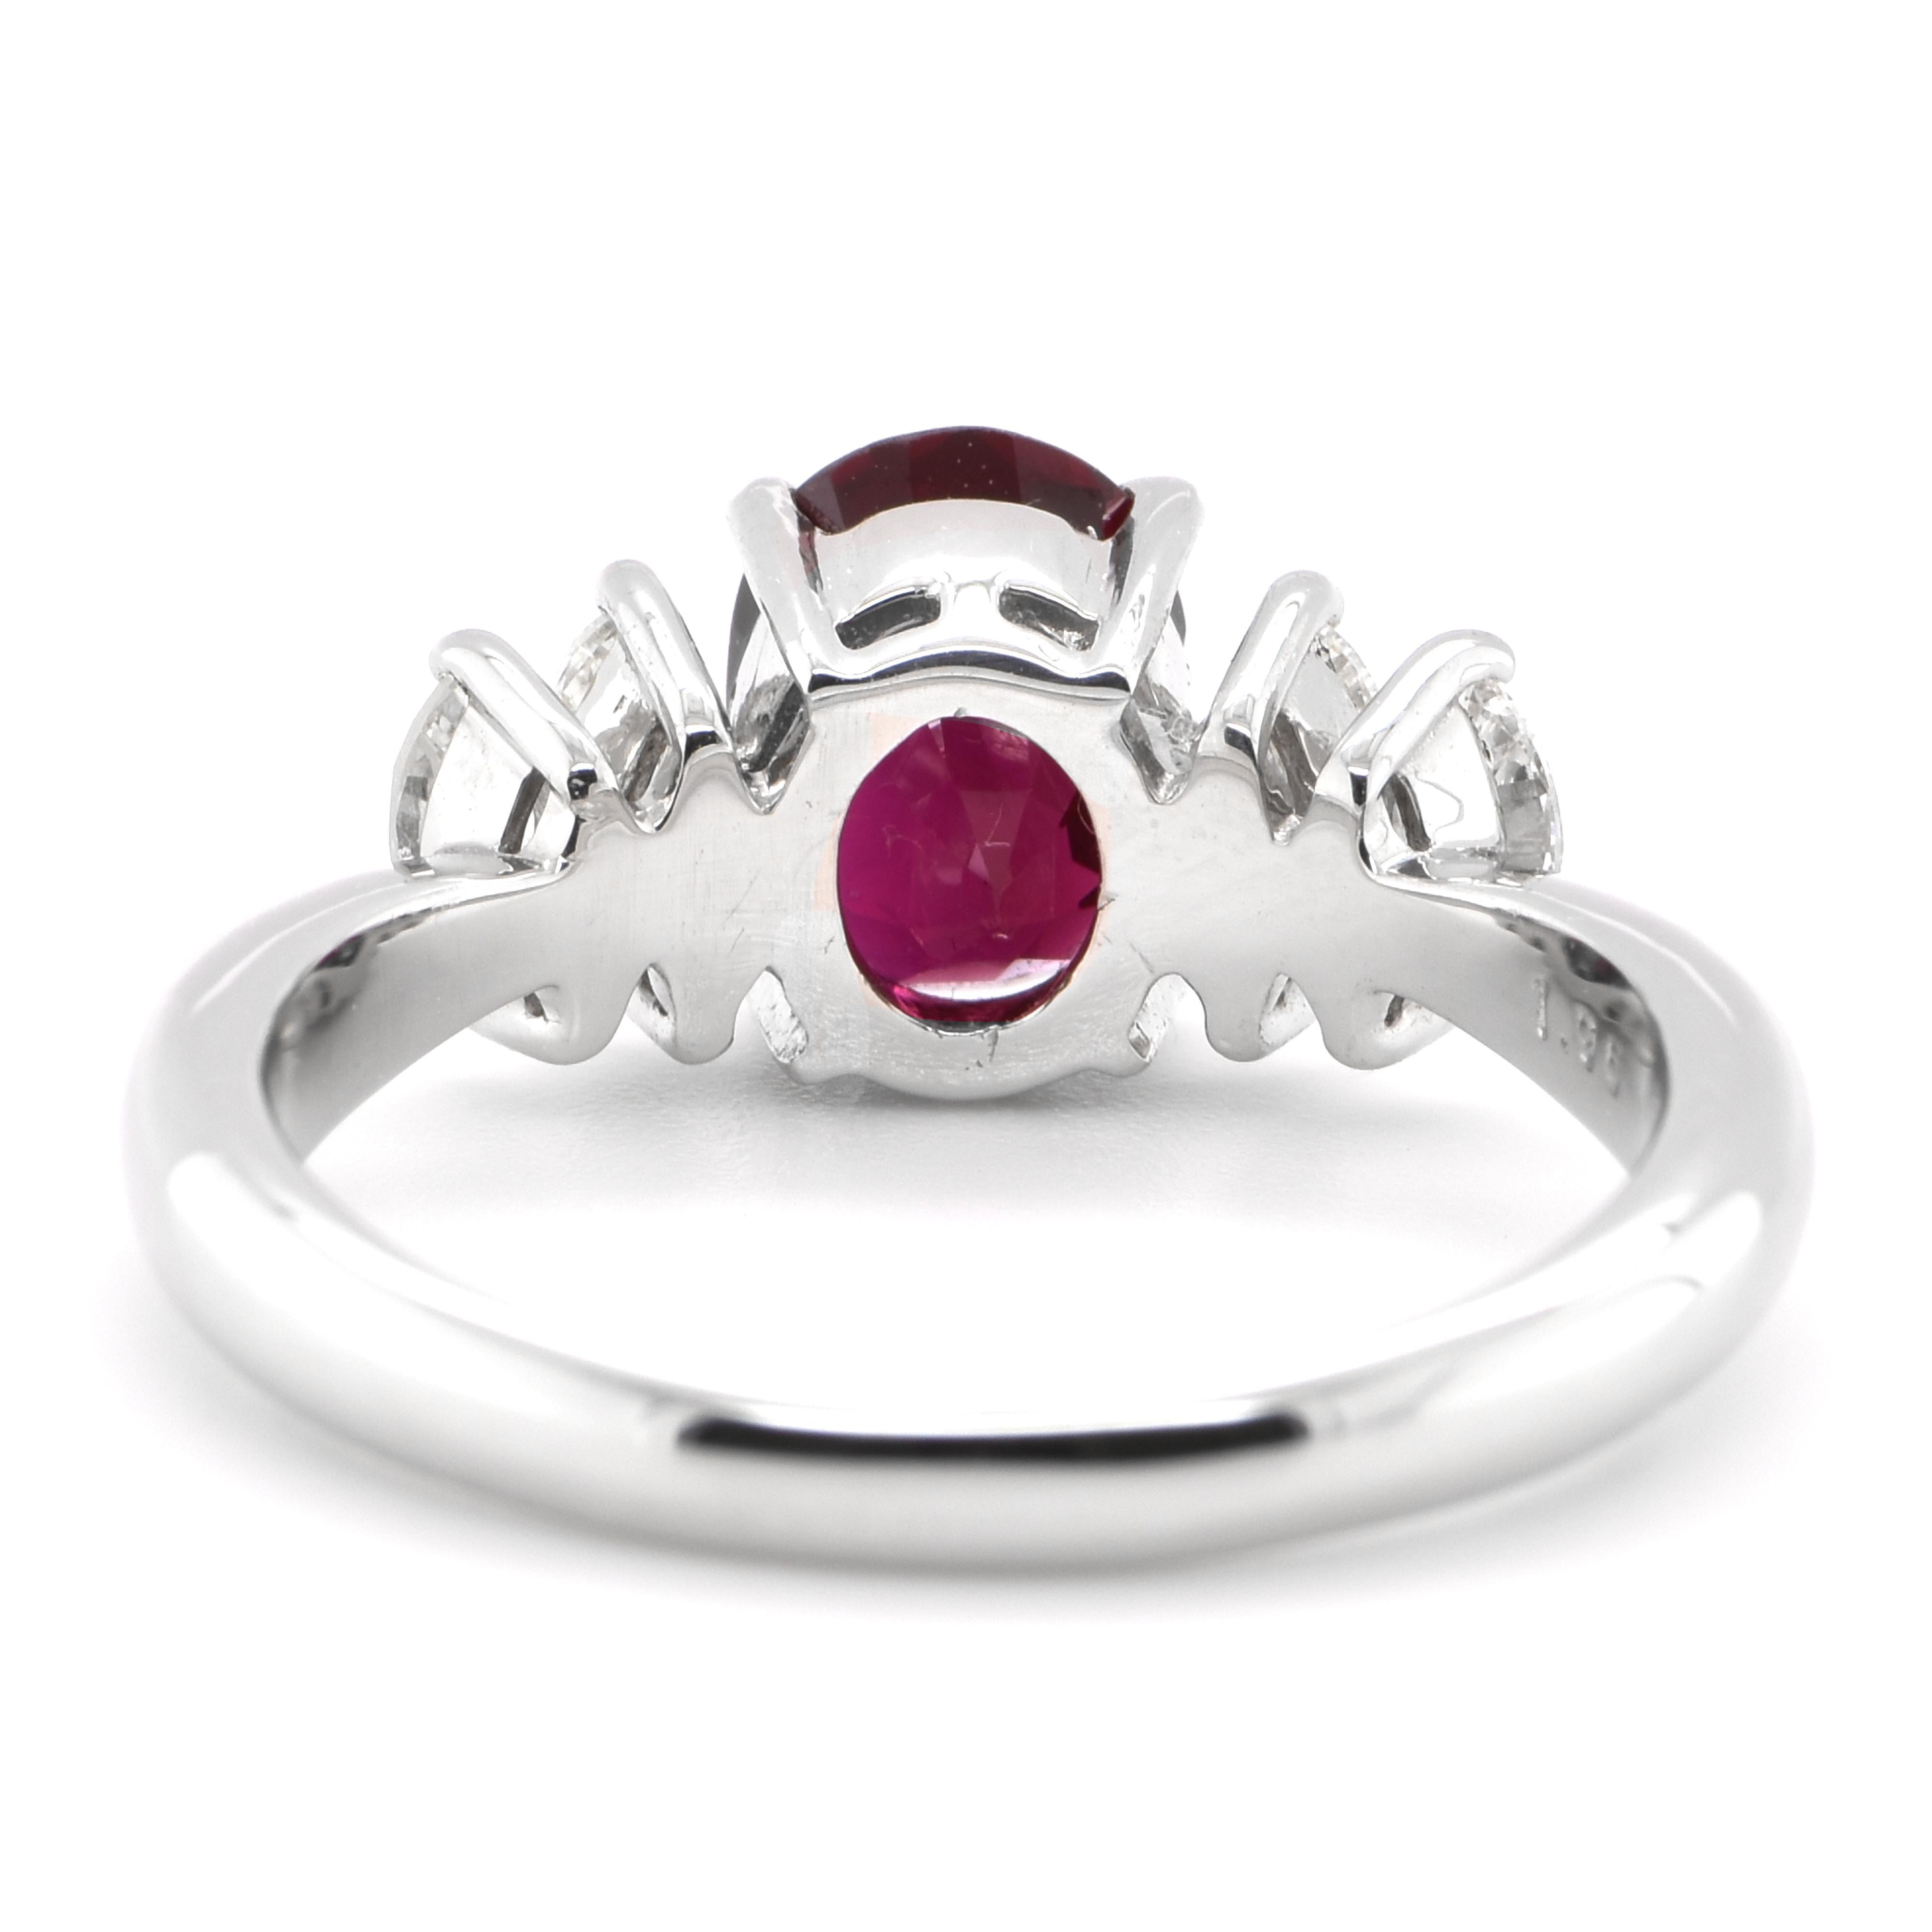 Oval Cut AIGS Certified 1.96 Carat Natural Thai Pigeon Blood Ruby Ring Set in Platinum